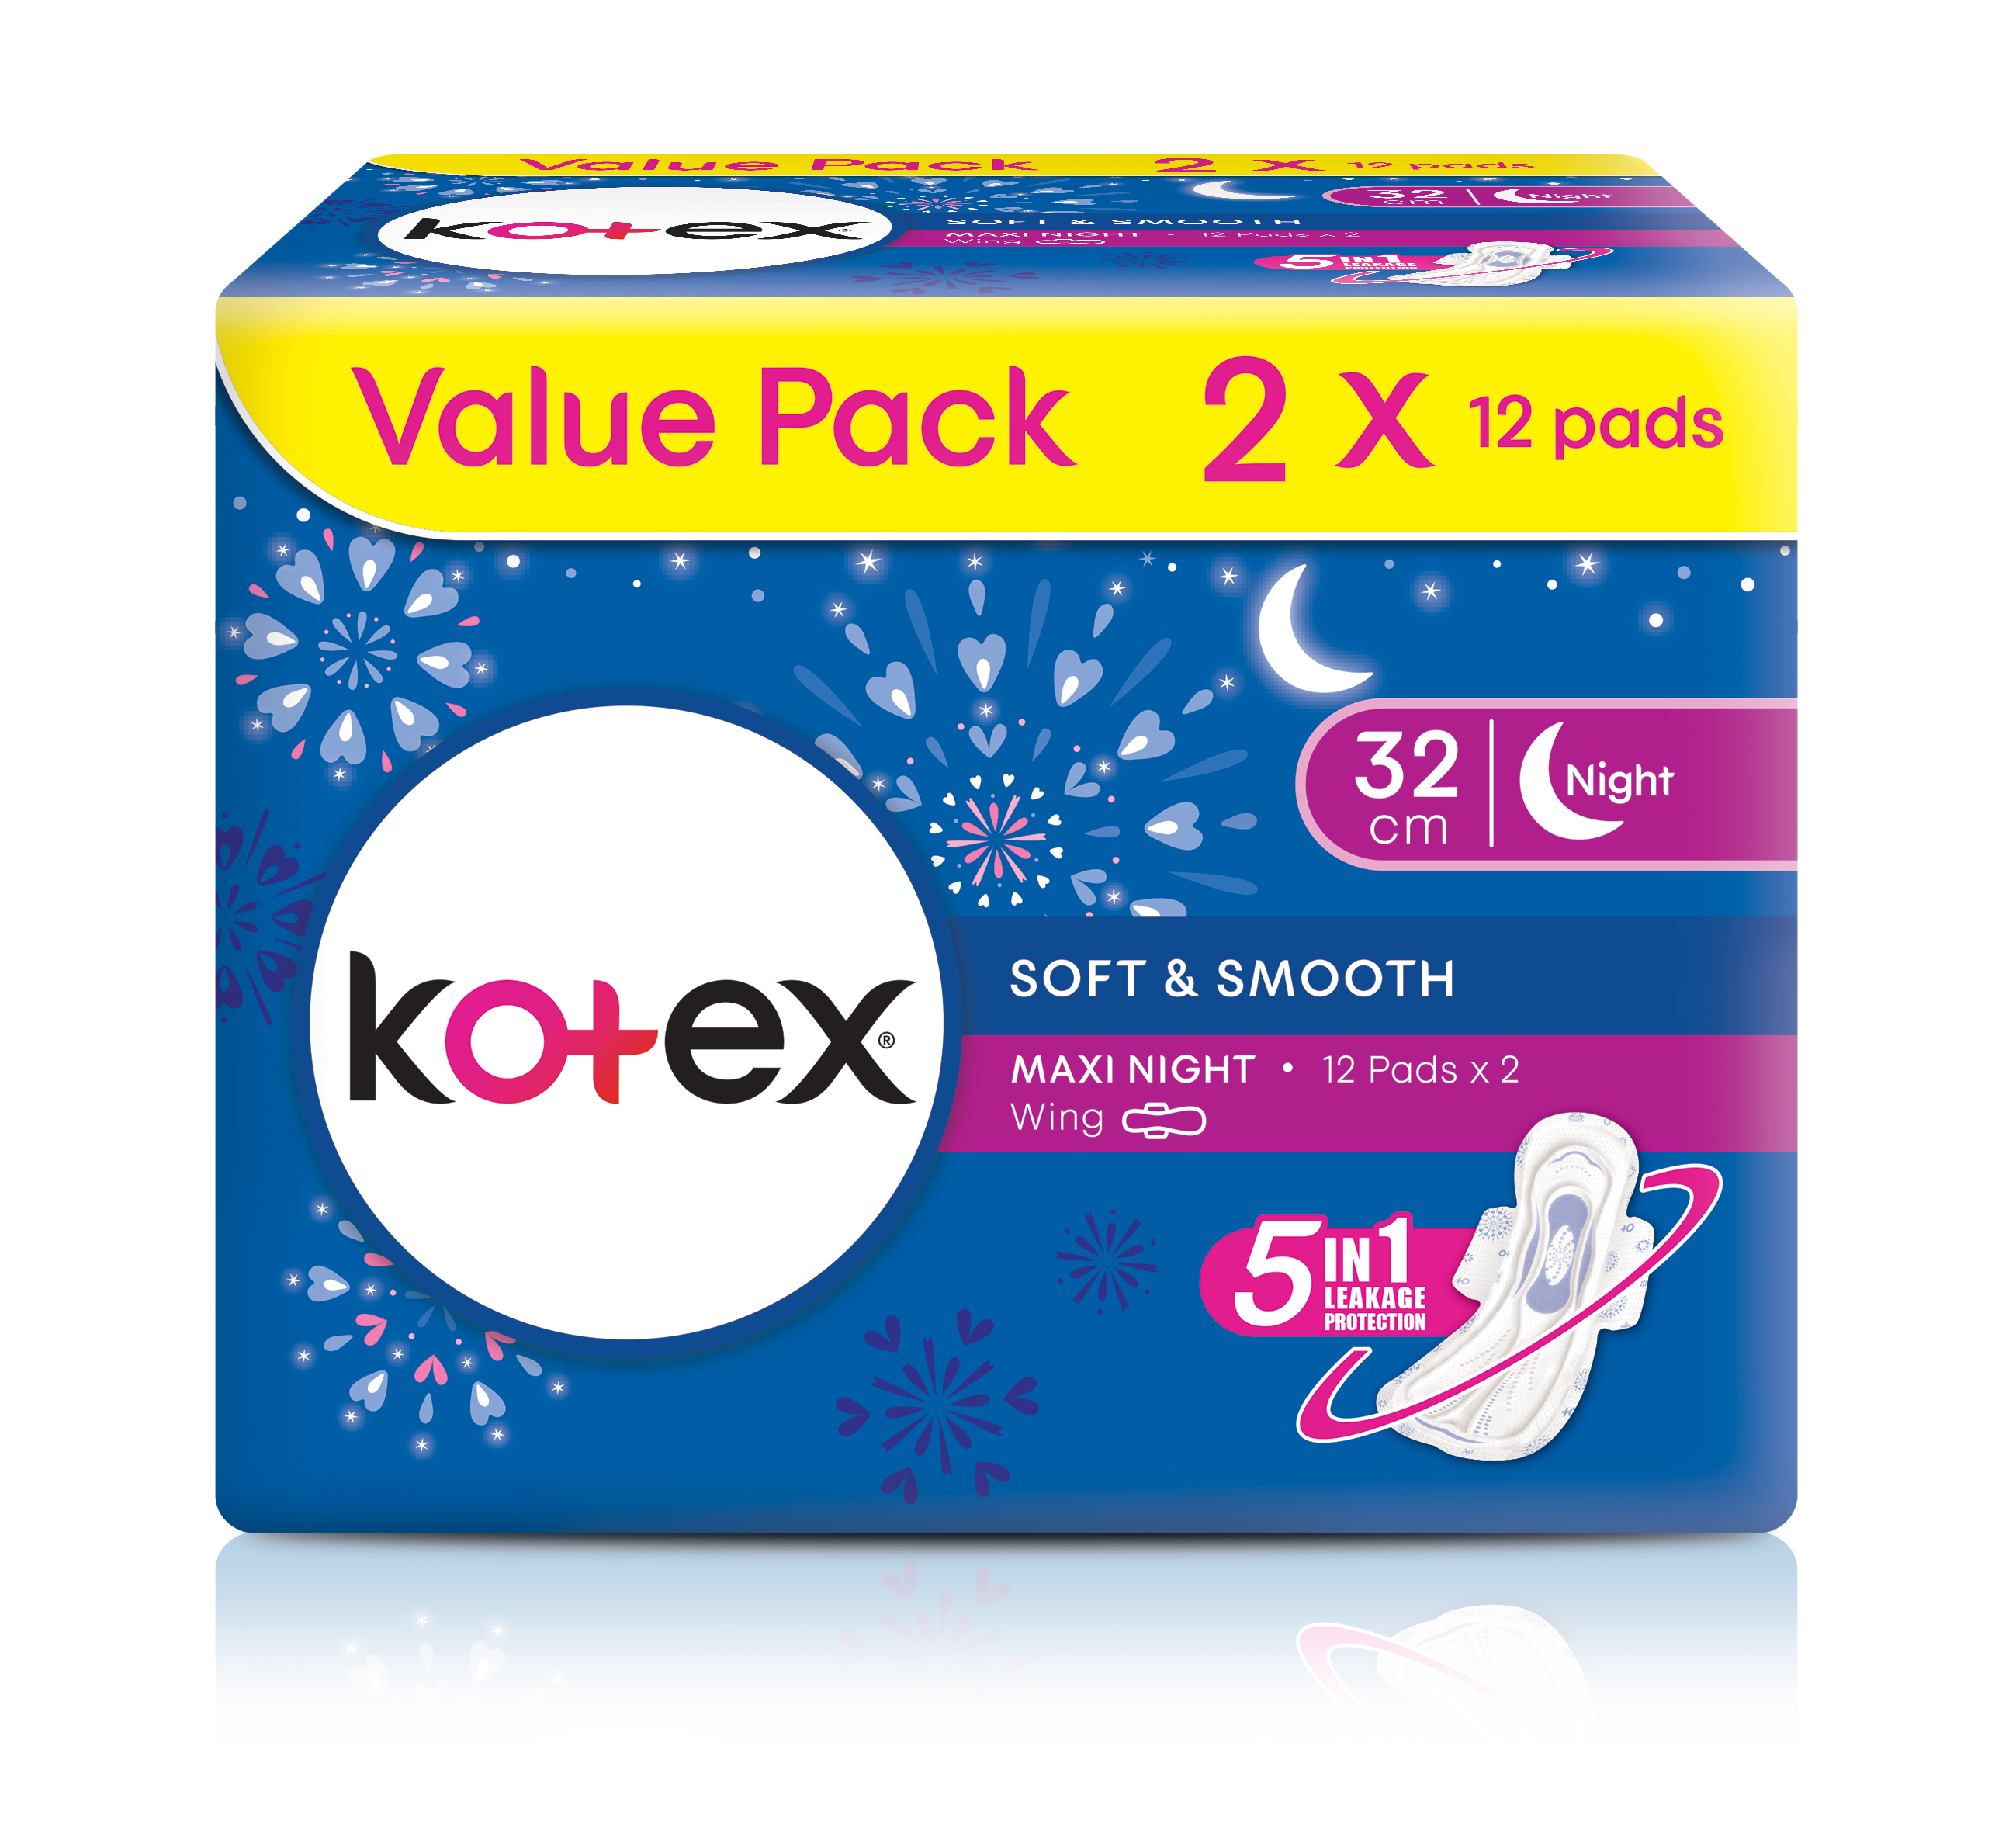 KOTEX SOFT AND SMOOTH MAXI NIGHT 32CM WING (12s X 2pack)